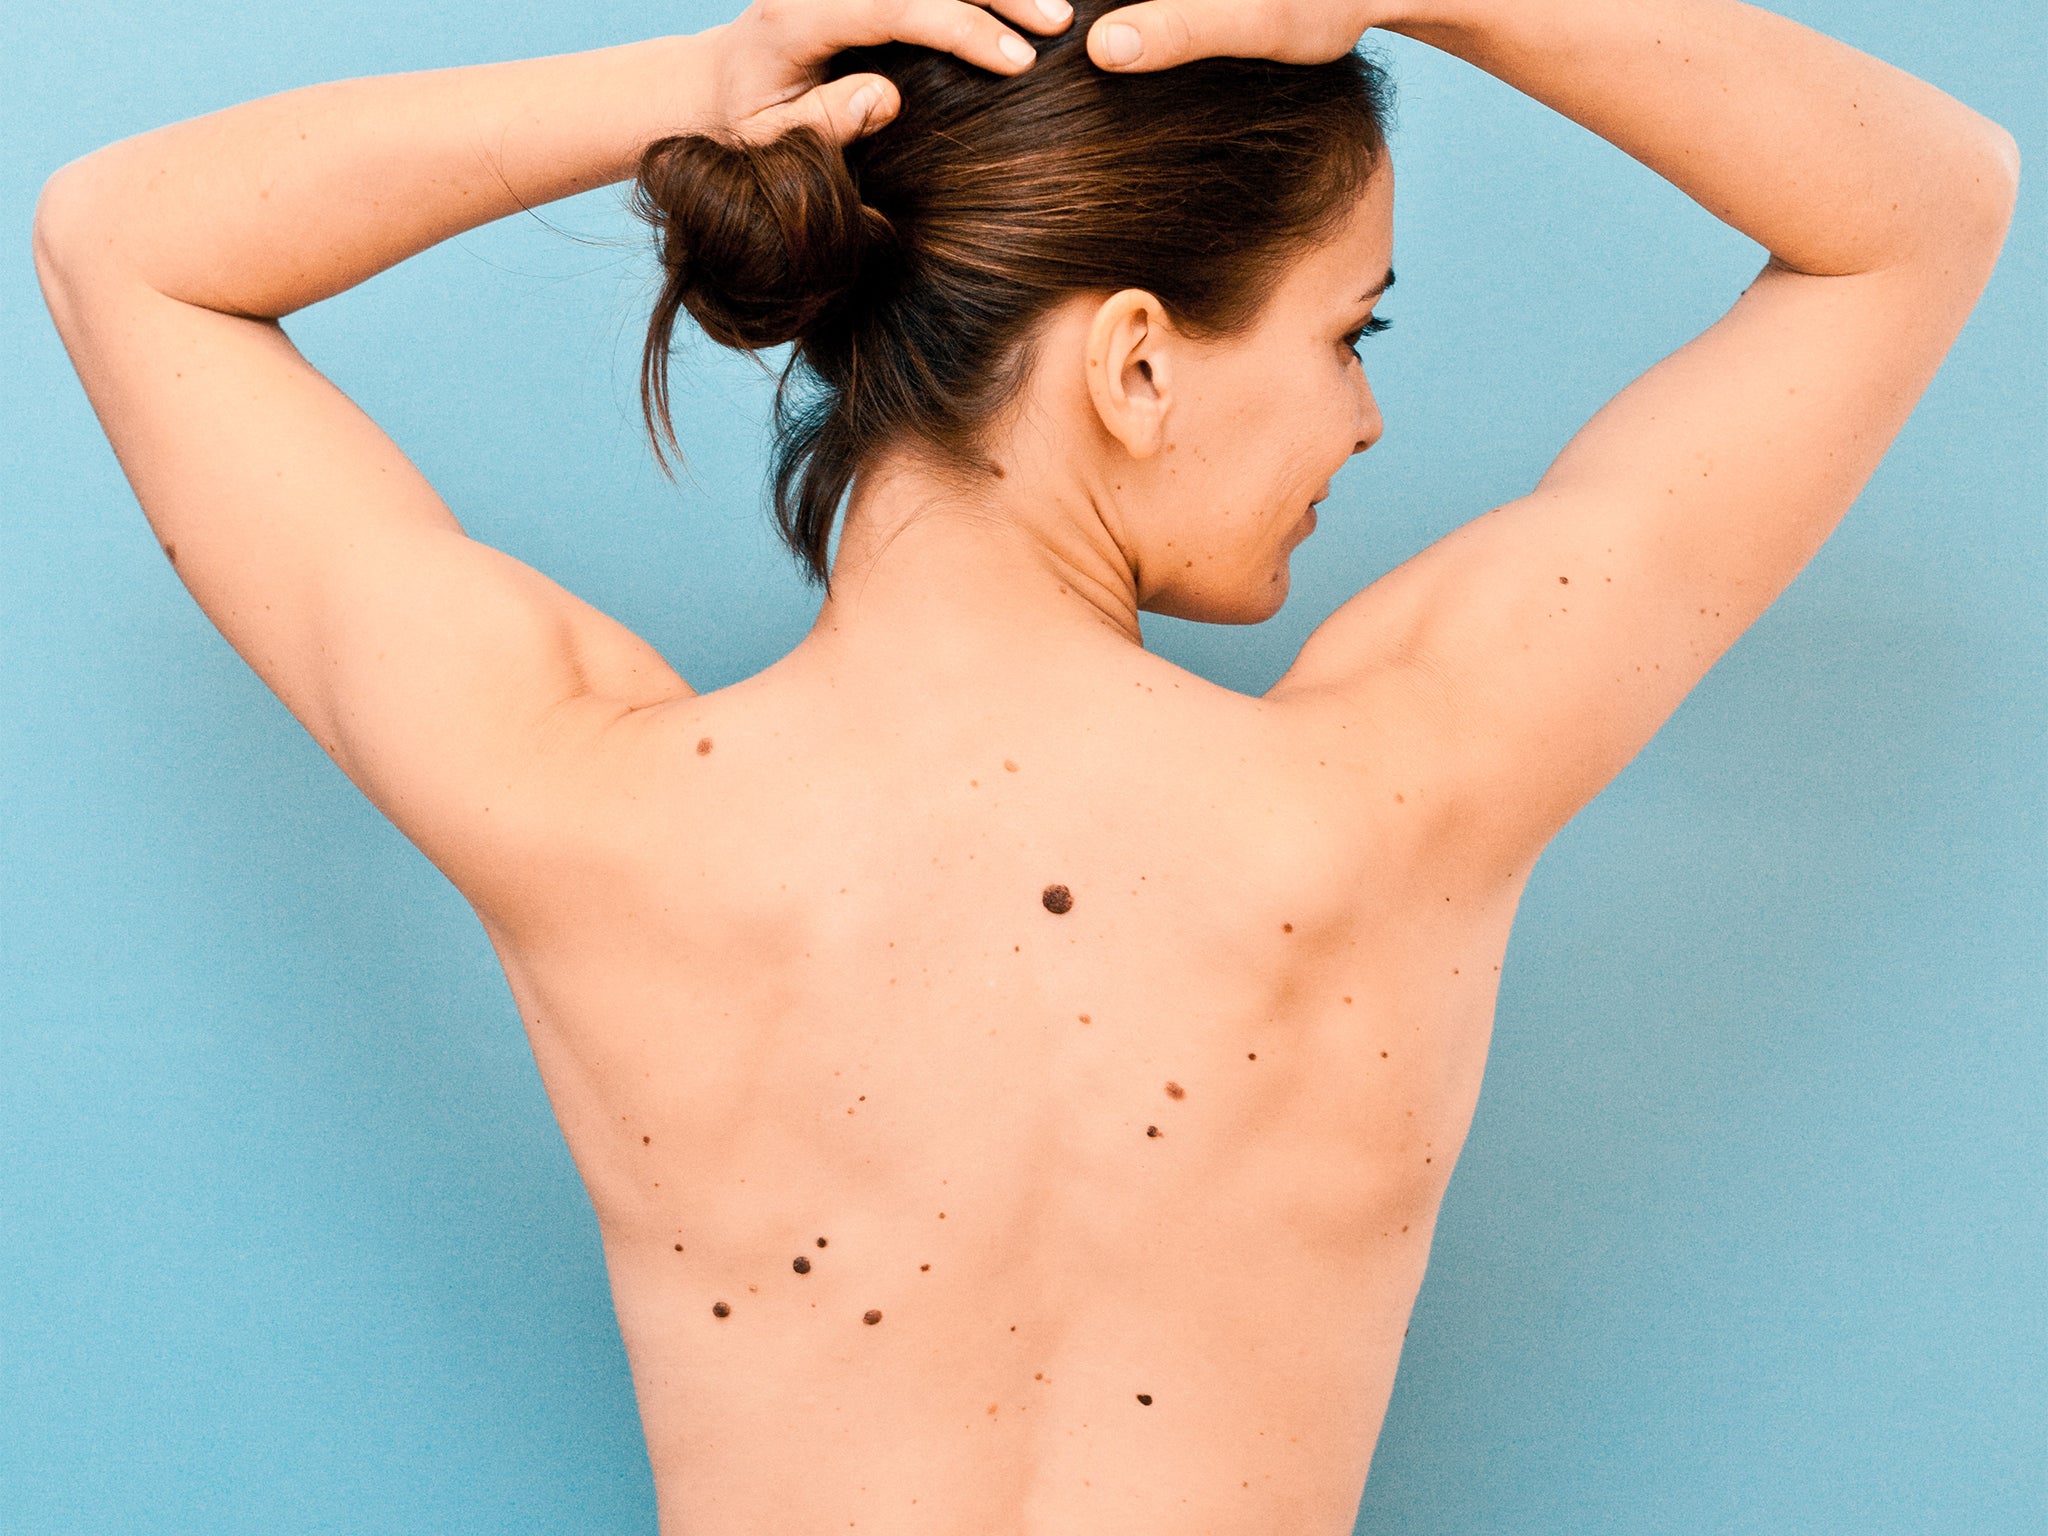 Counting Moles On Your Arm May Help To Assess Skin Cancer